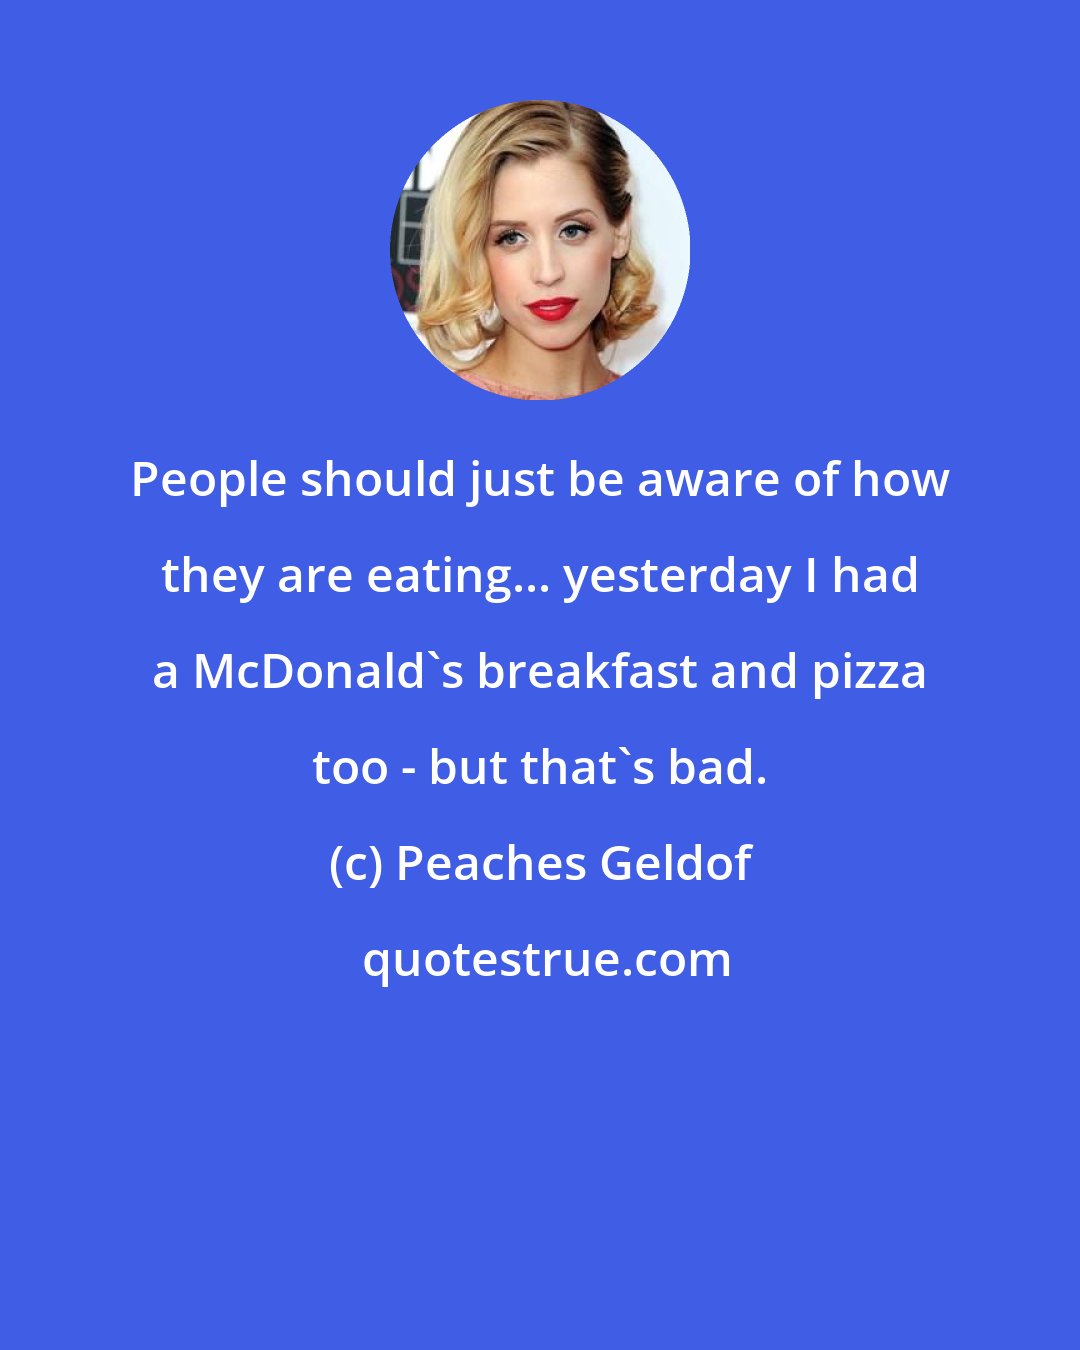 Peaches Geldof: People should just be aware of how they are eating... yesterday I had a McDonald's breakfast and pizza too - but that's bad.